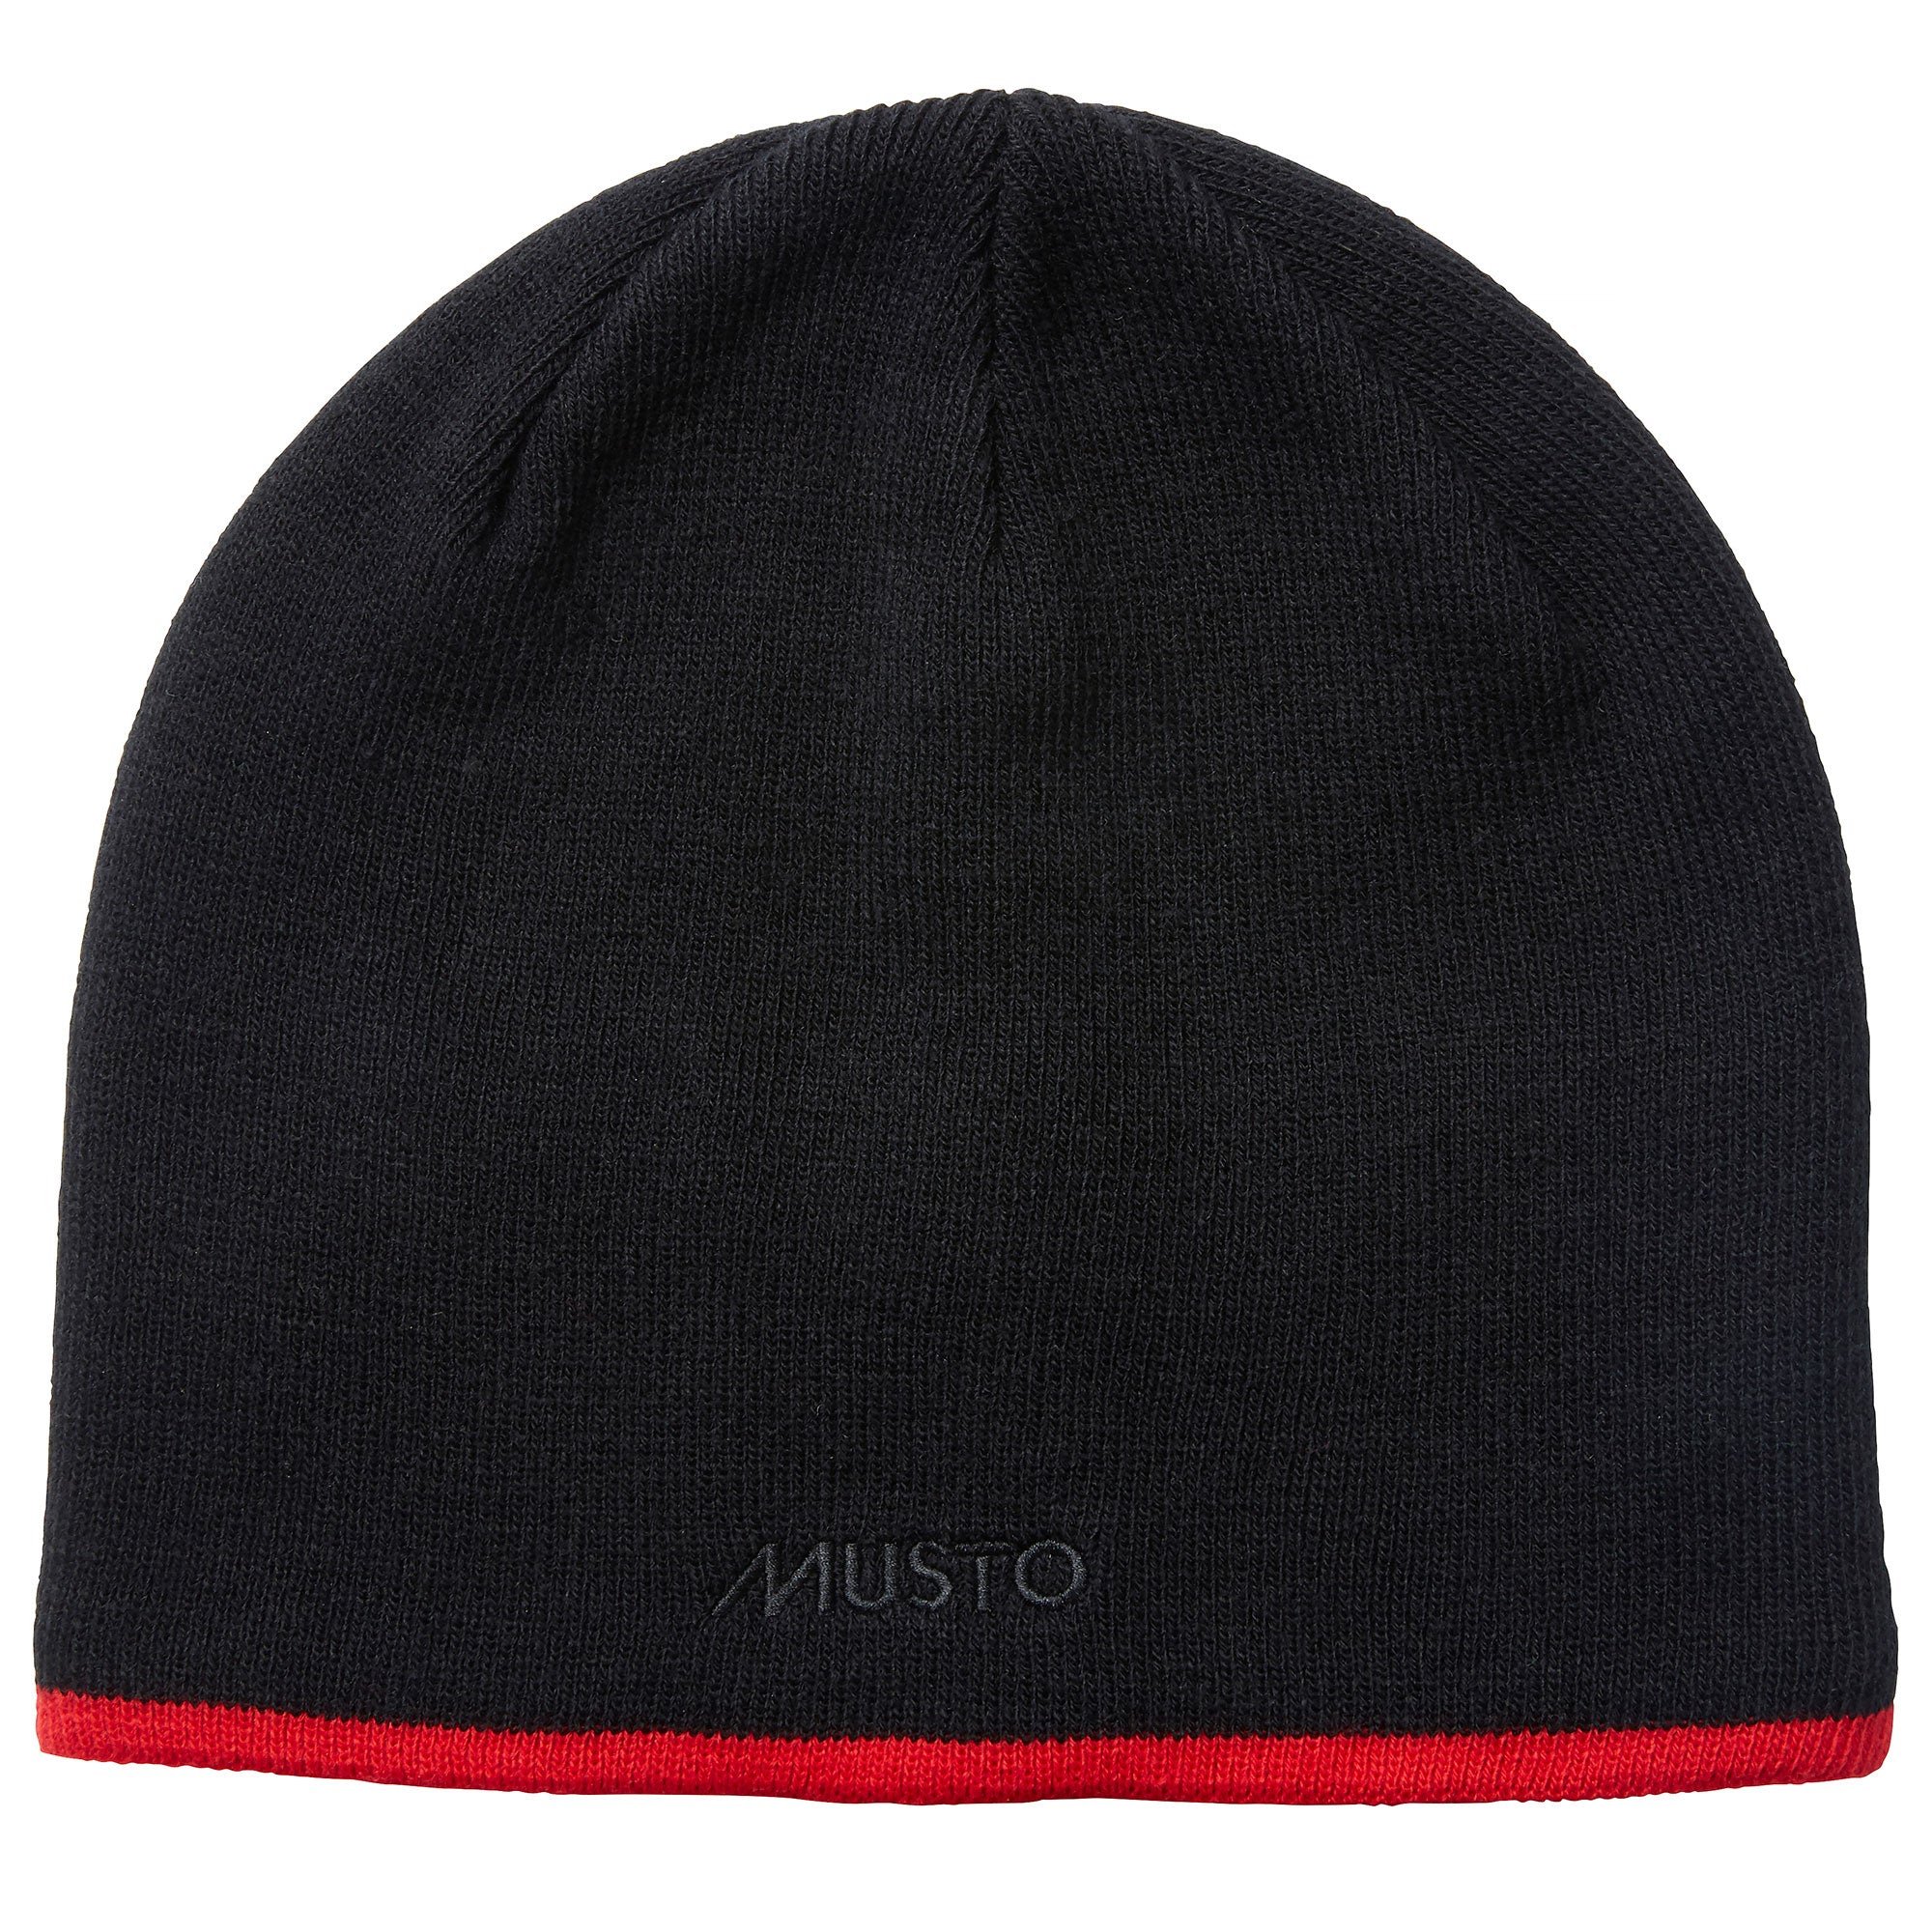 MUSTO knitted hat Black NEW